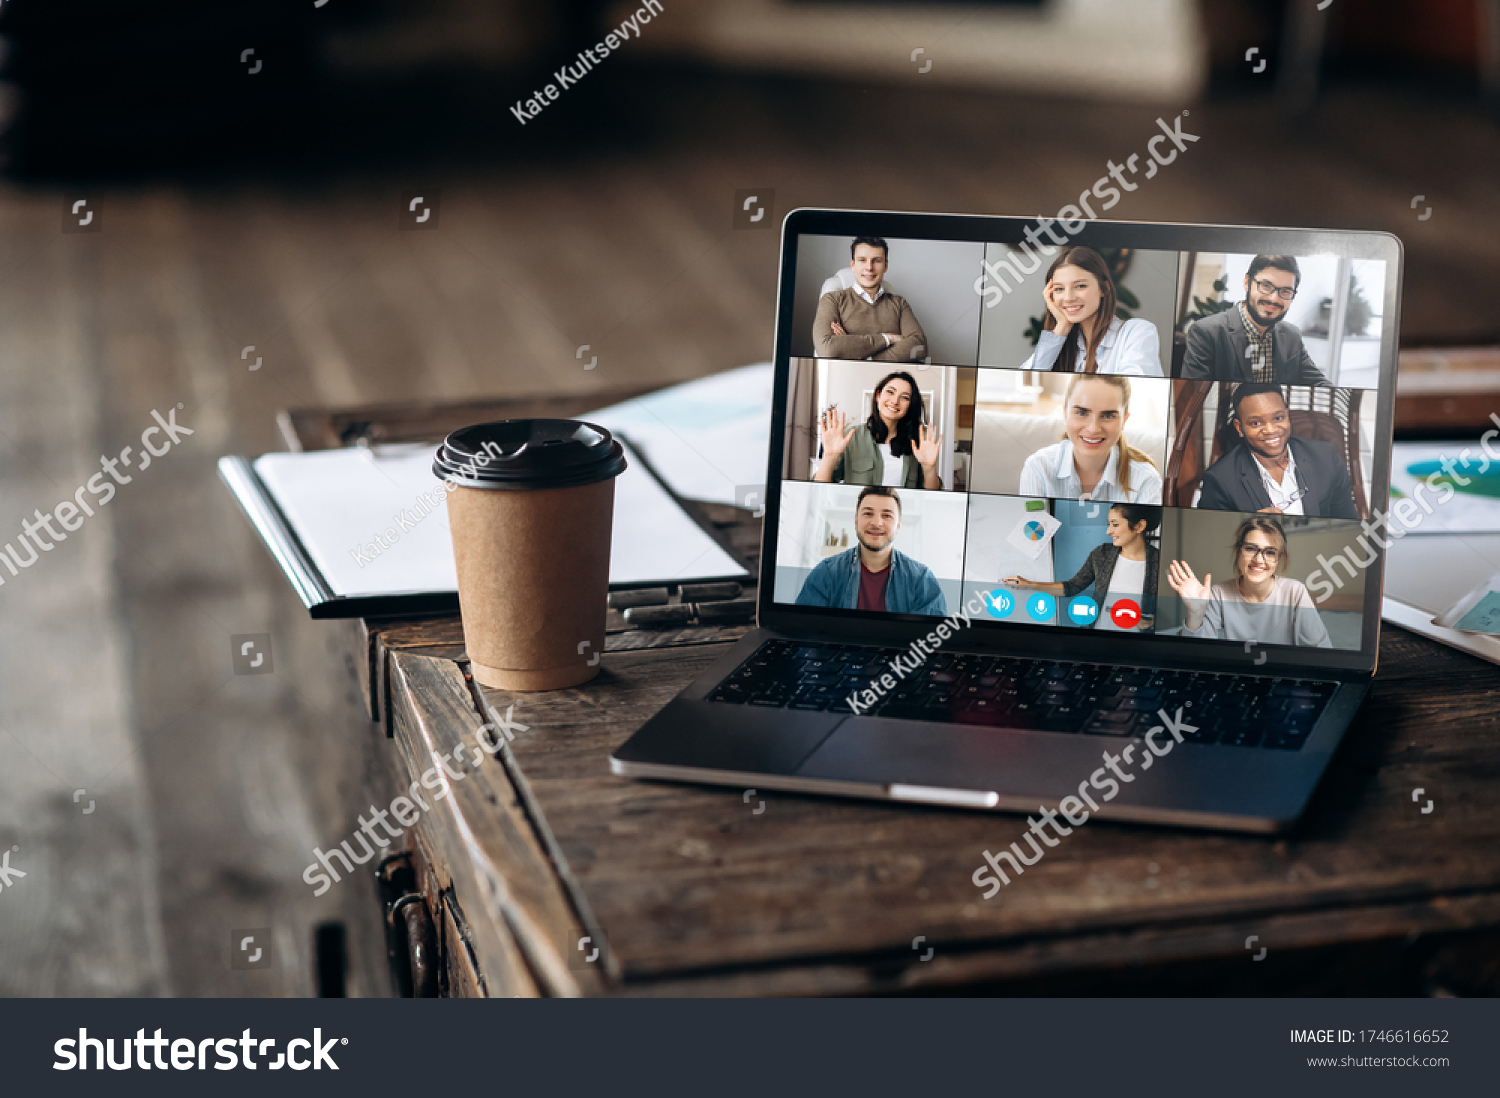 Virtual meeting online. Video conference by laptop. Online business meeting. On the laptop screen, people who gathered in a video conference to work on-line, near stands a cup of coffee #1746616652